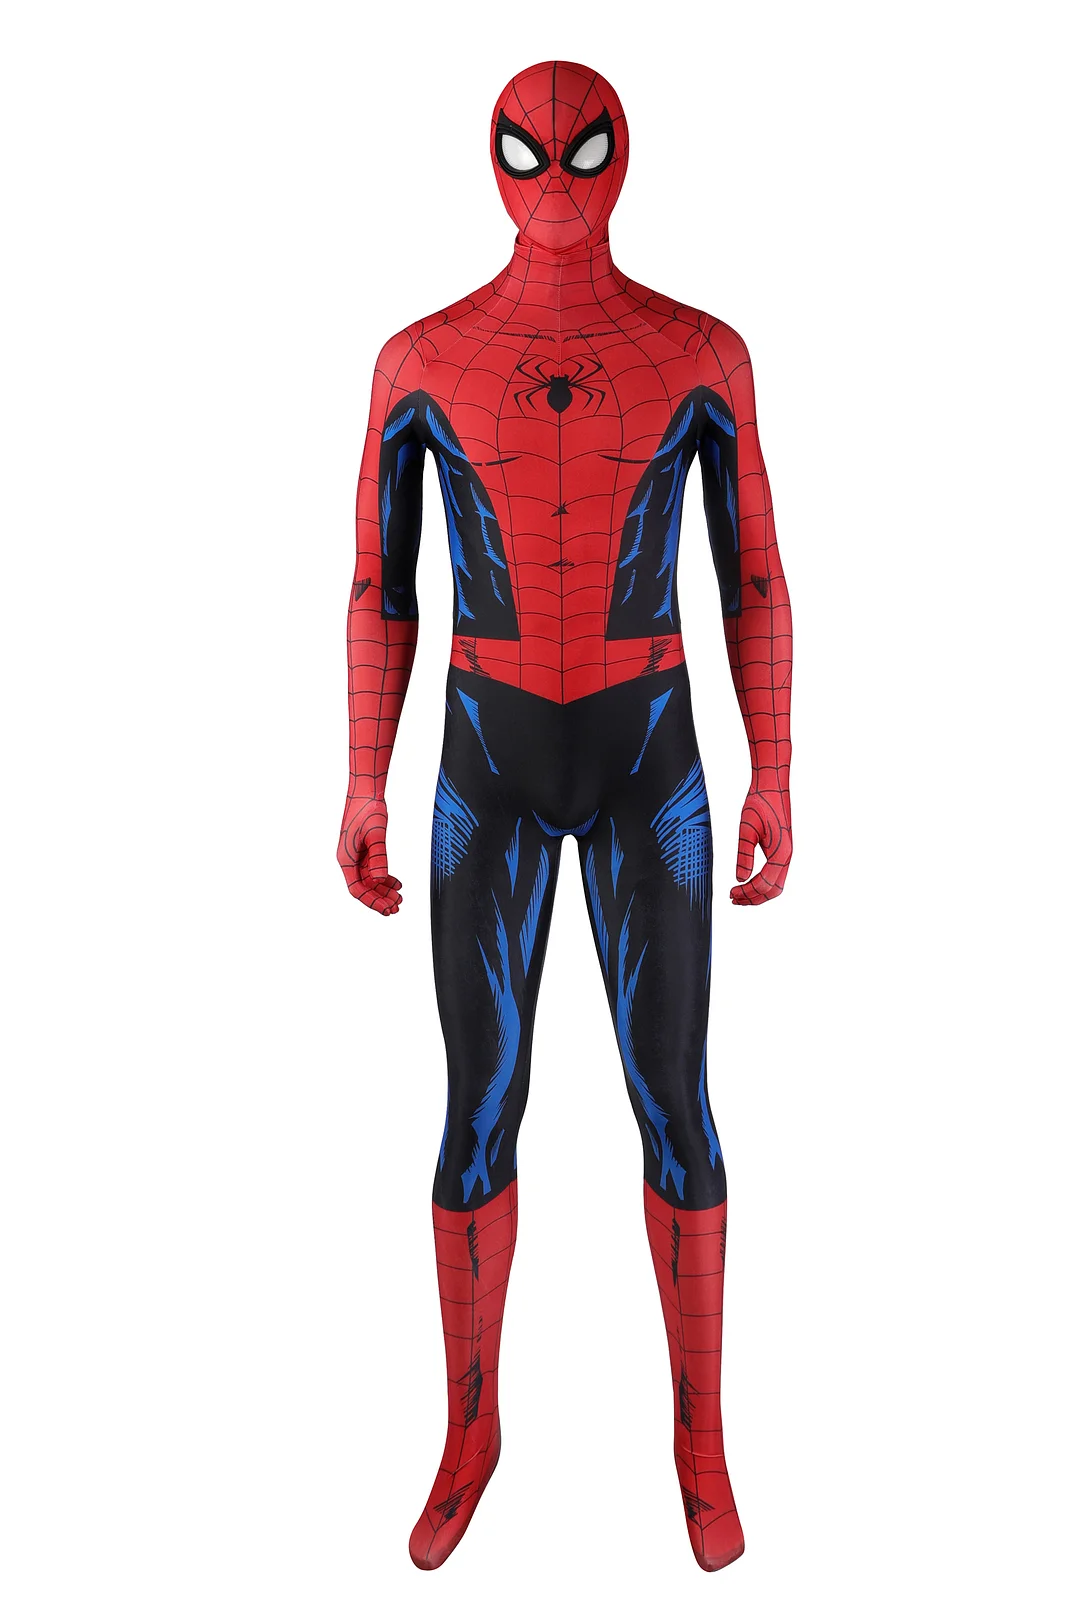 Spiderman PS5 Vintage Comic Book Suit Classic Spider-Man Cosplay Costume